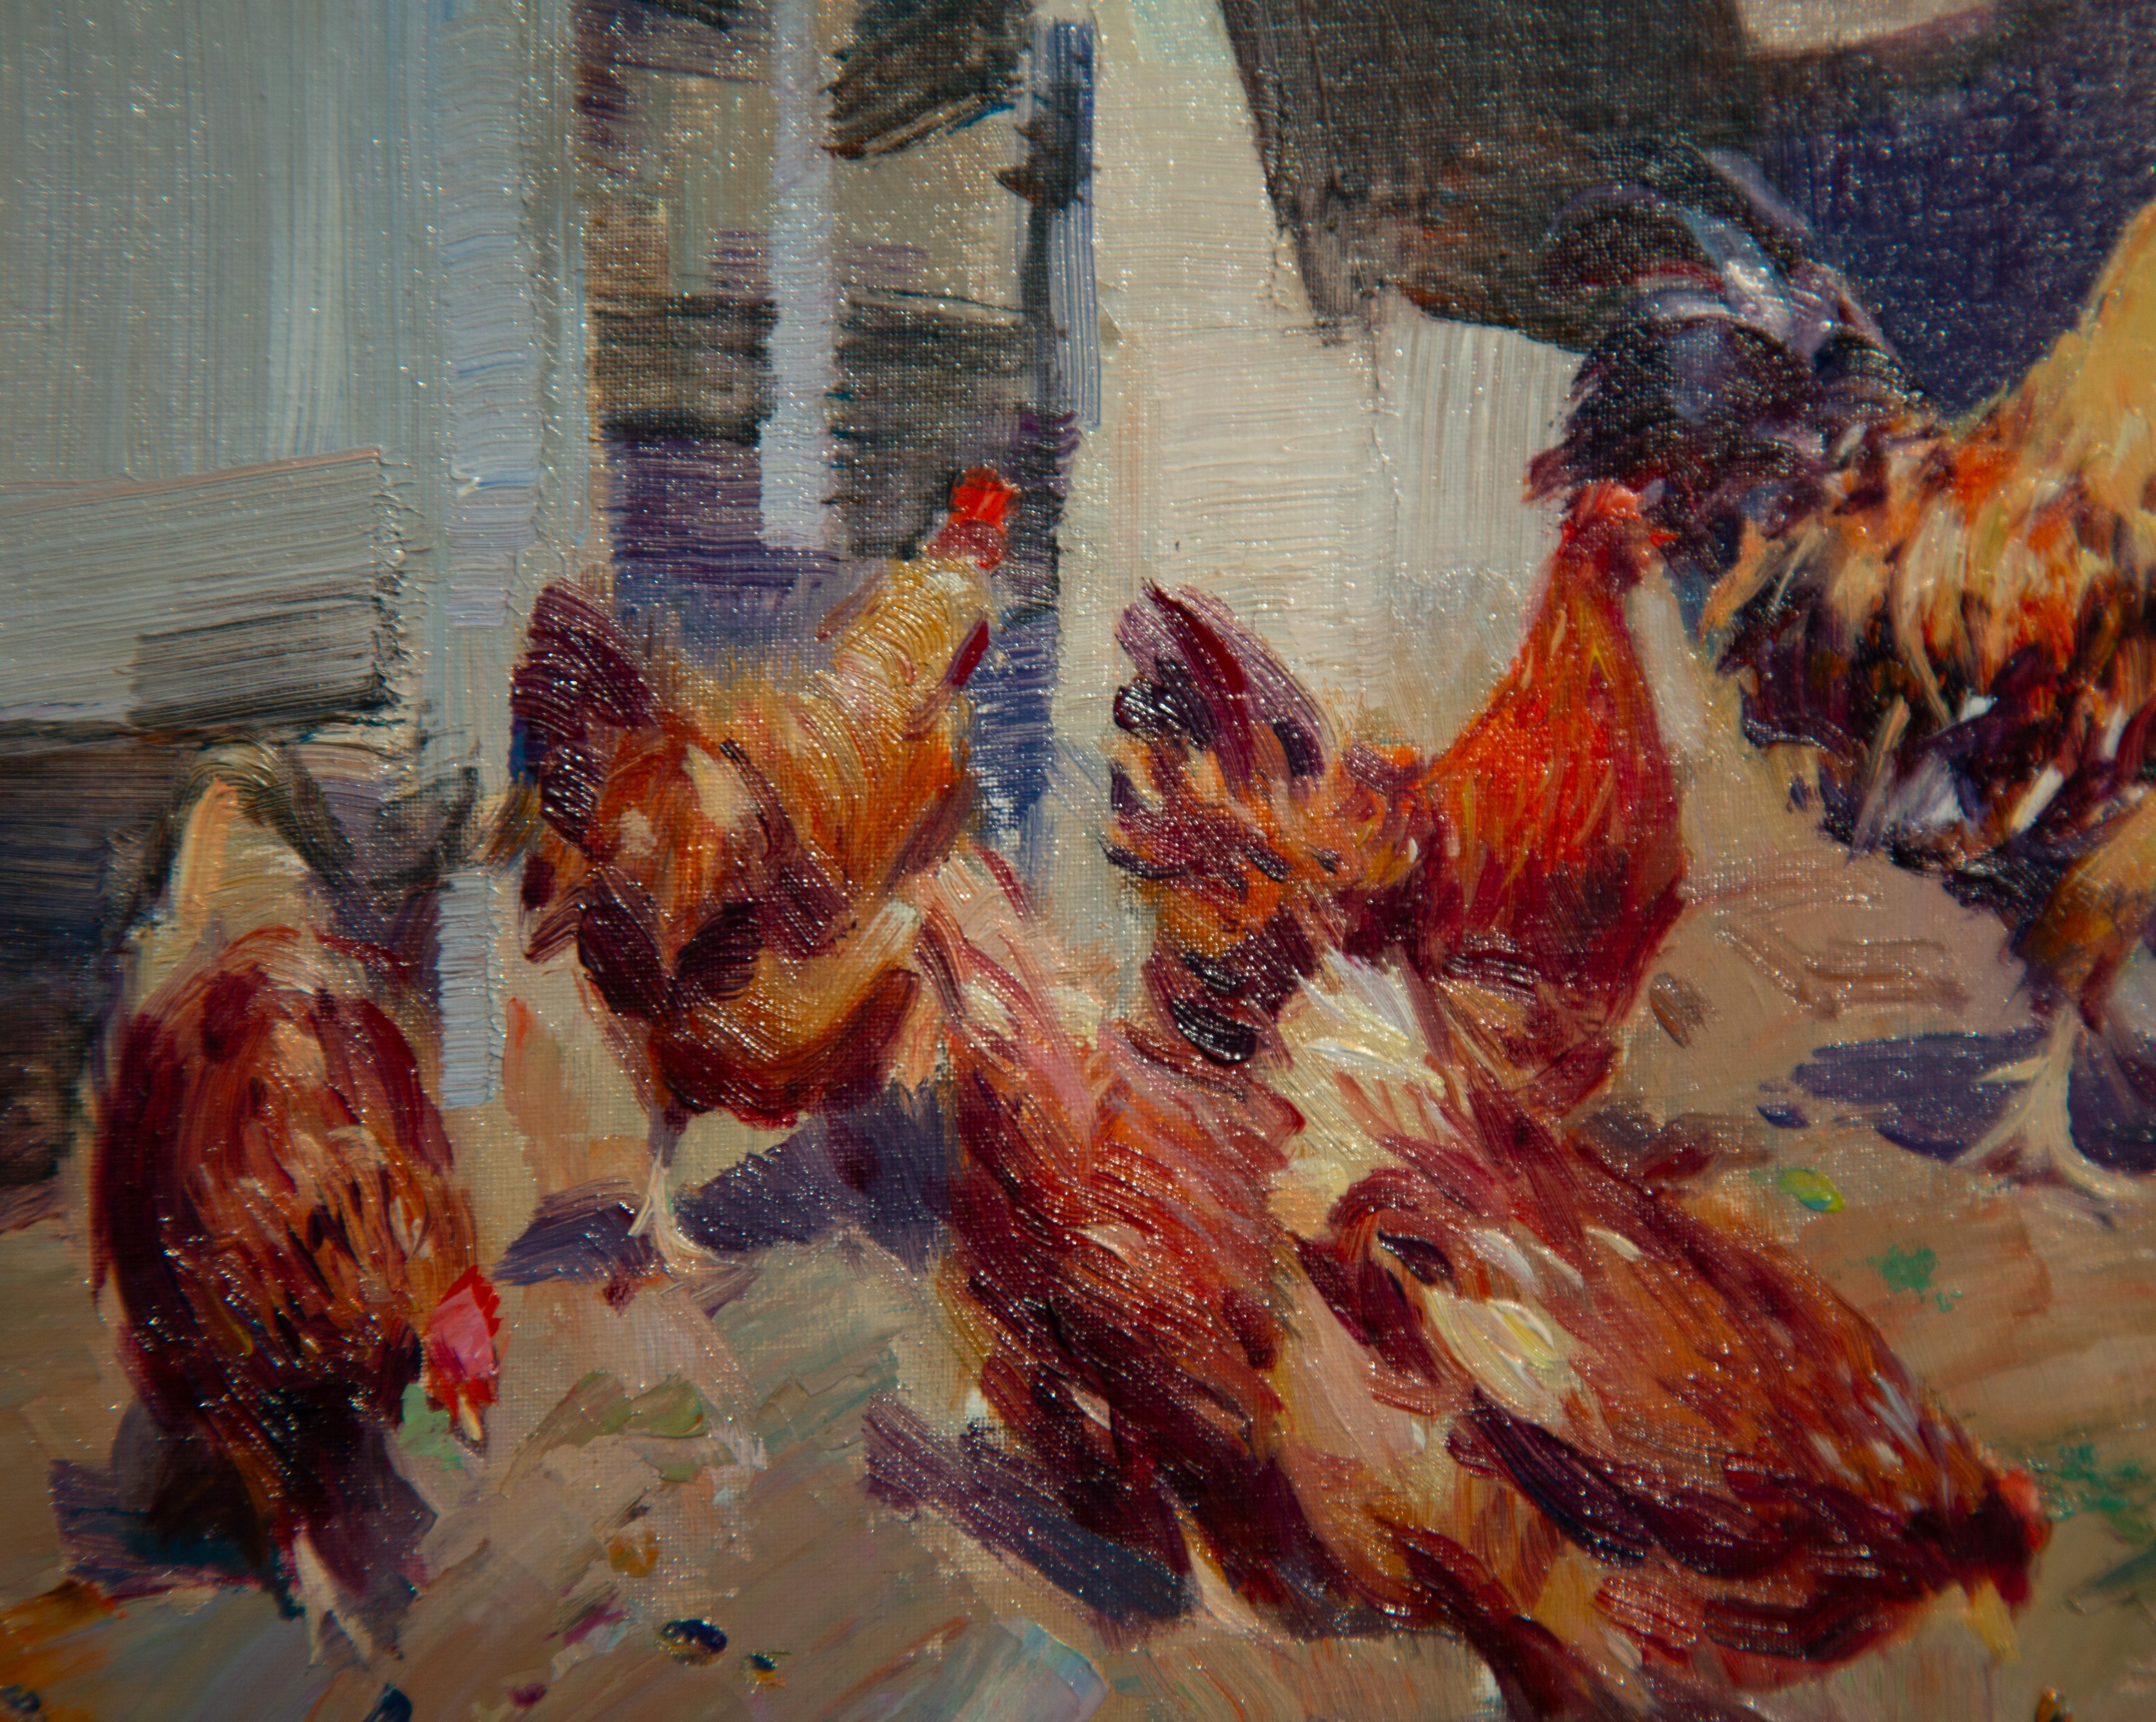 'The Farmyard' Contemporary painting of chickens, cockerel in a farm setting - Impressionist Painting by Francisco Calabuig